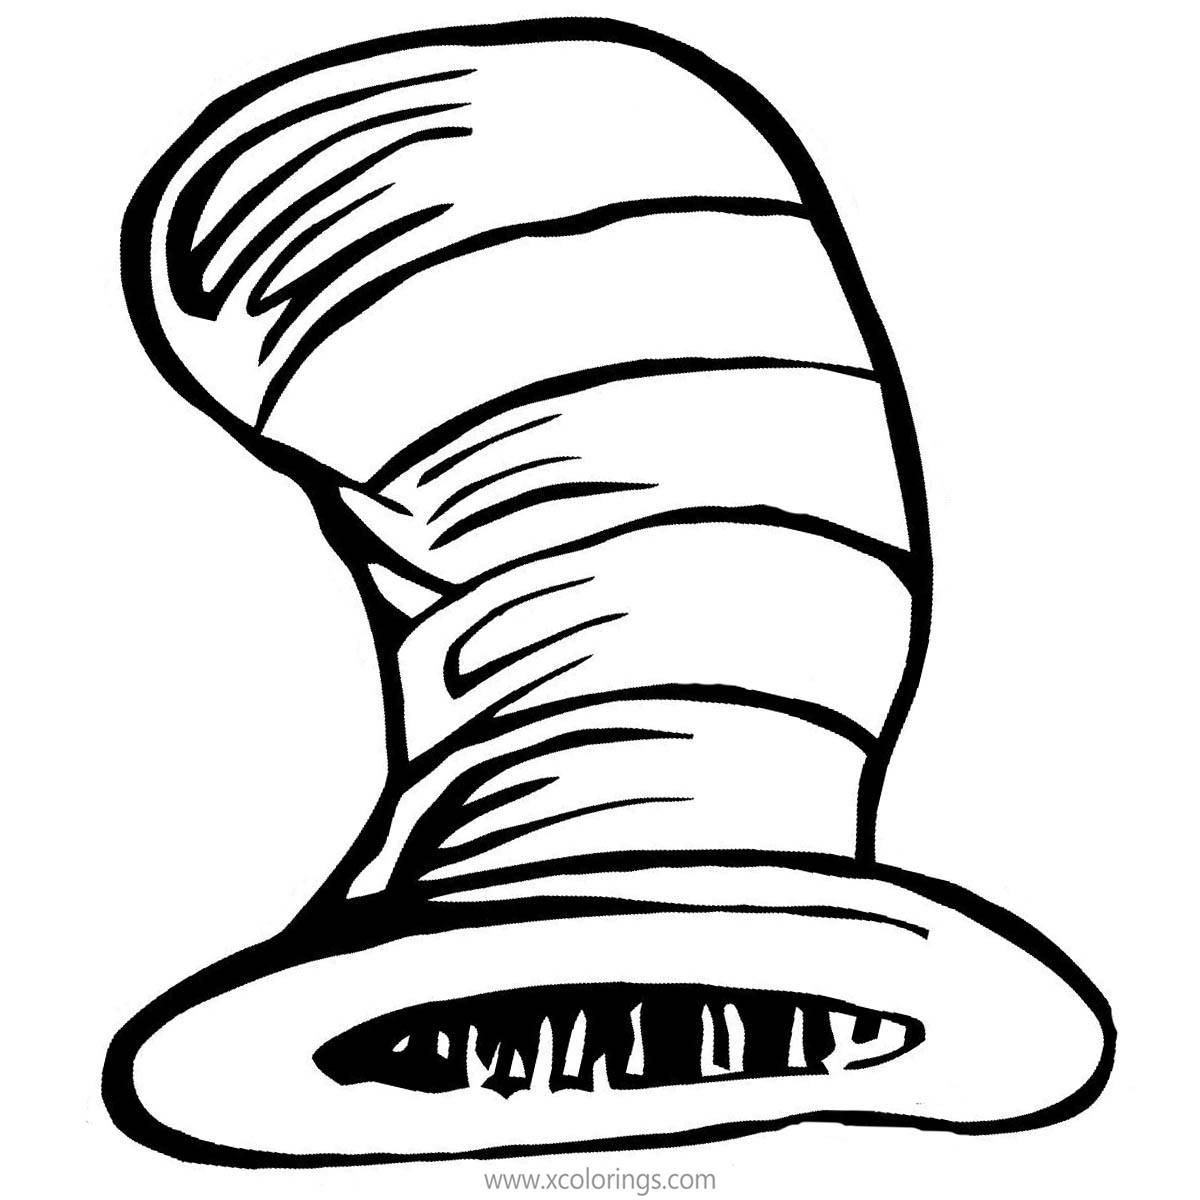 Cat In The Hat Coloring Pages Horseshoe Crab XColorings com